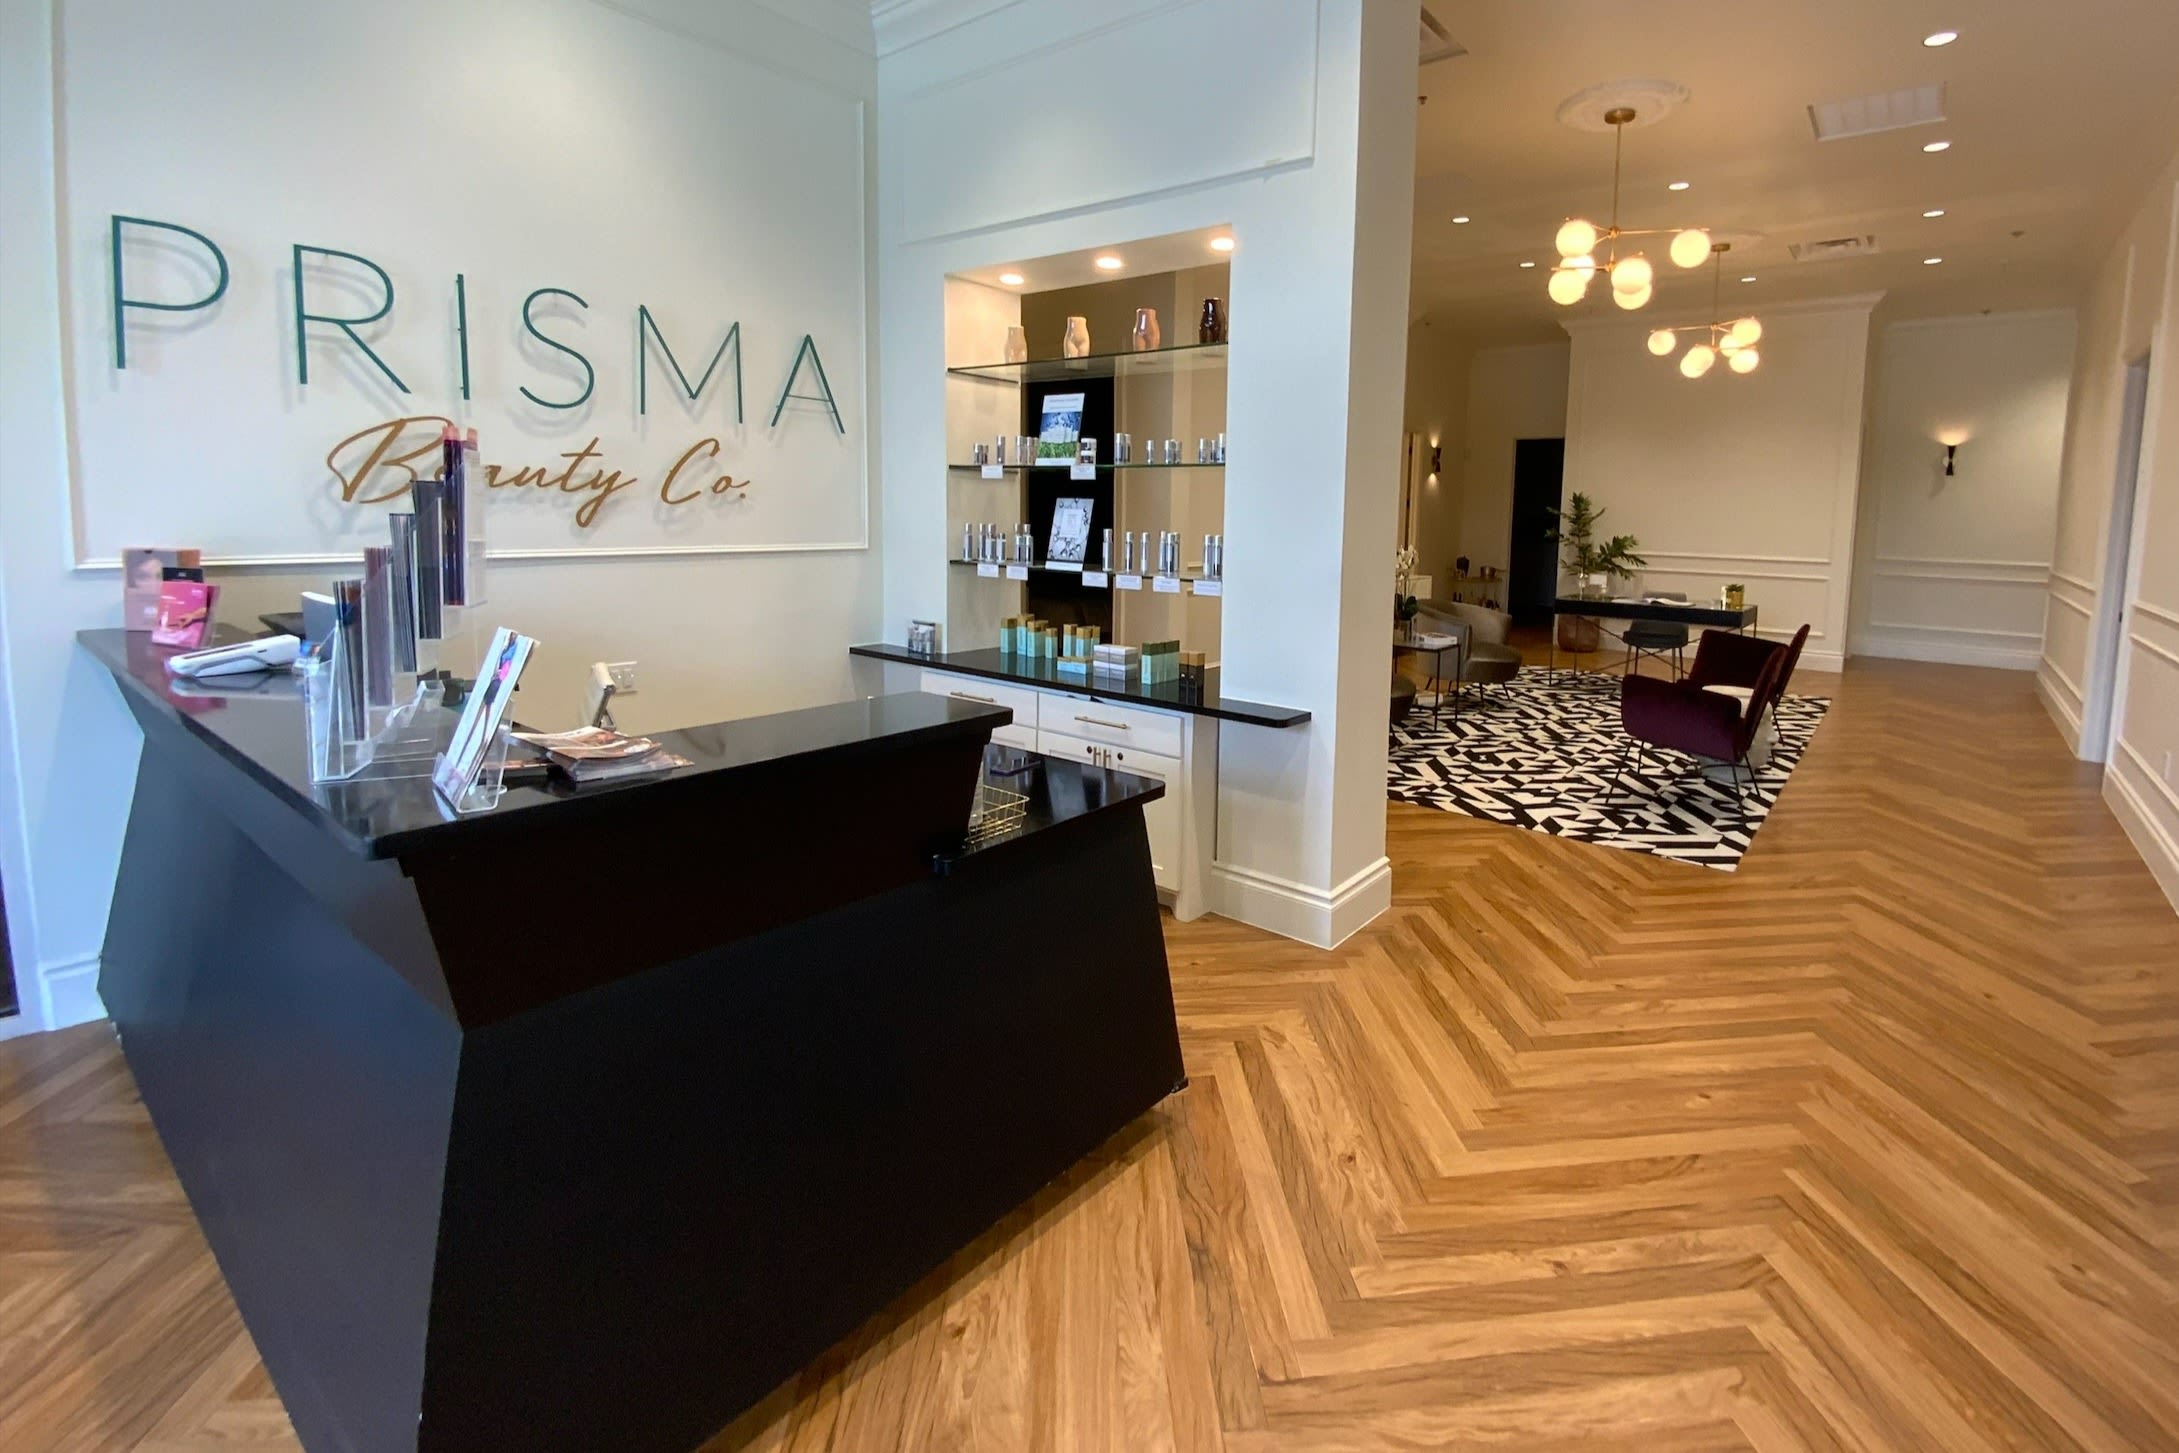 Prisma Beauty Co.: Read Reviews and Book Classes on ClassPass